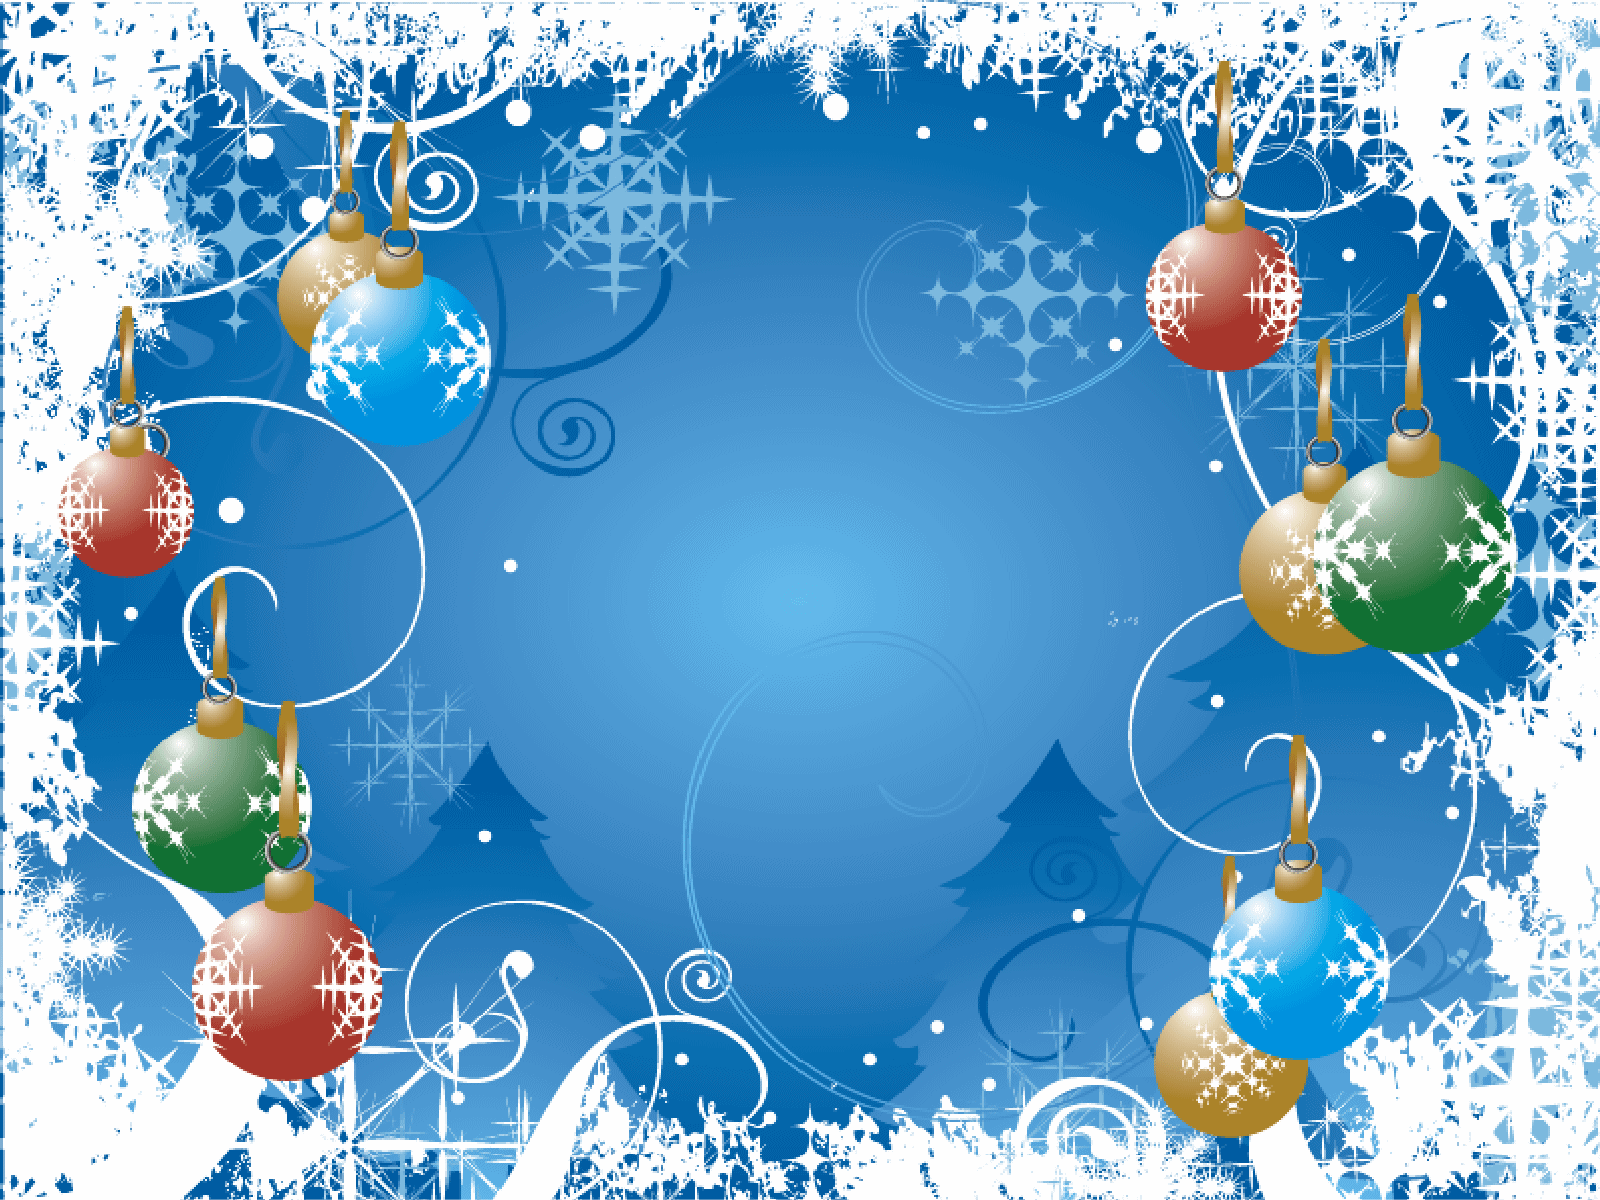 For Christmas Background Wallpaper Puter